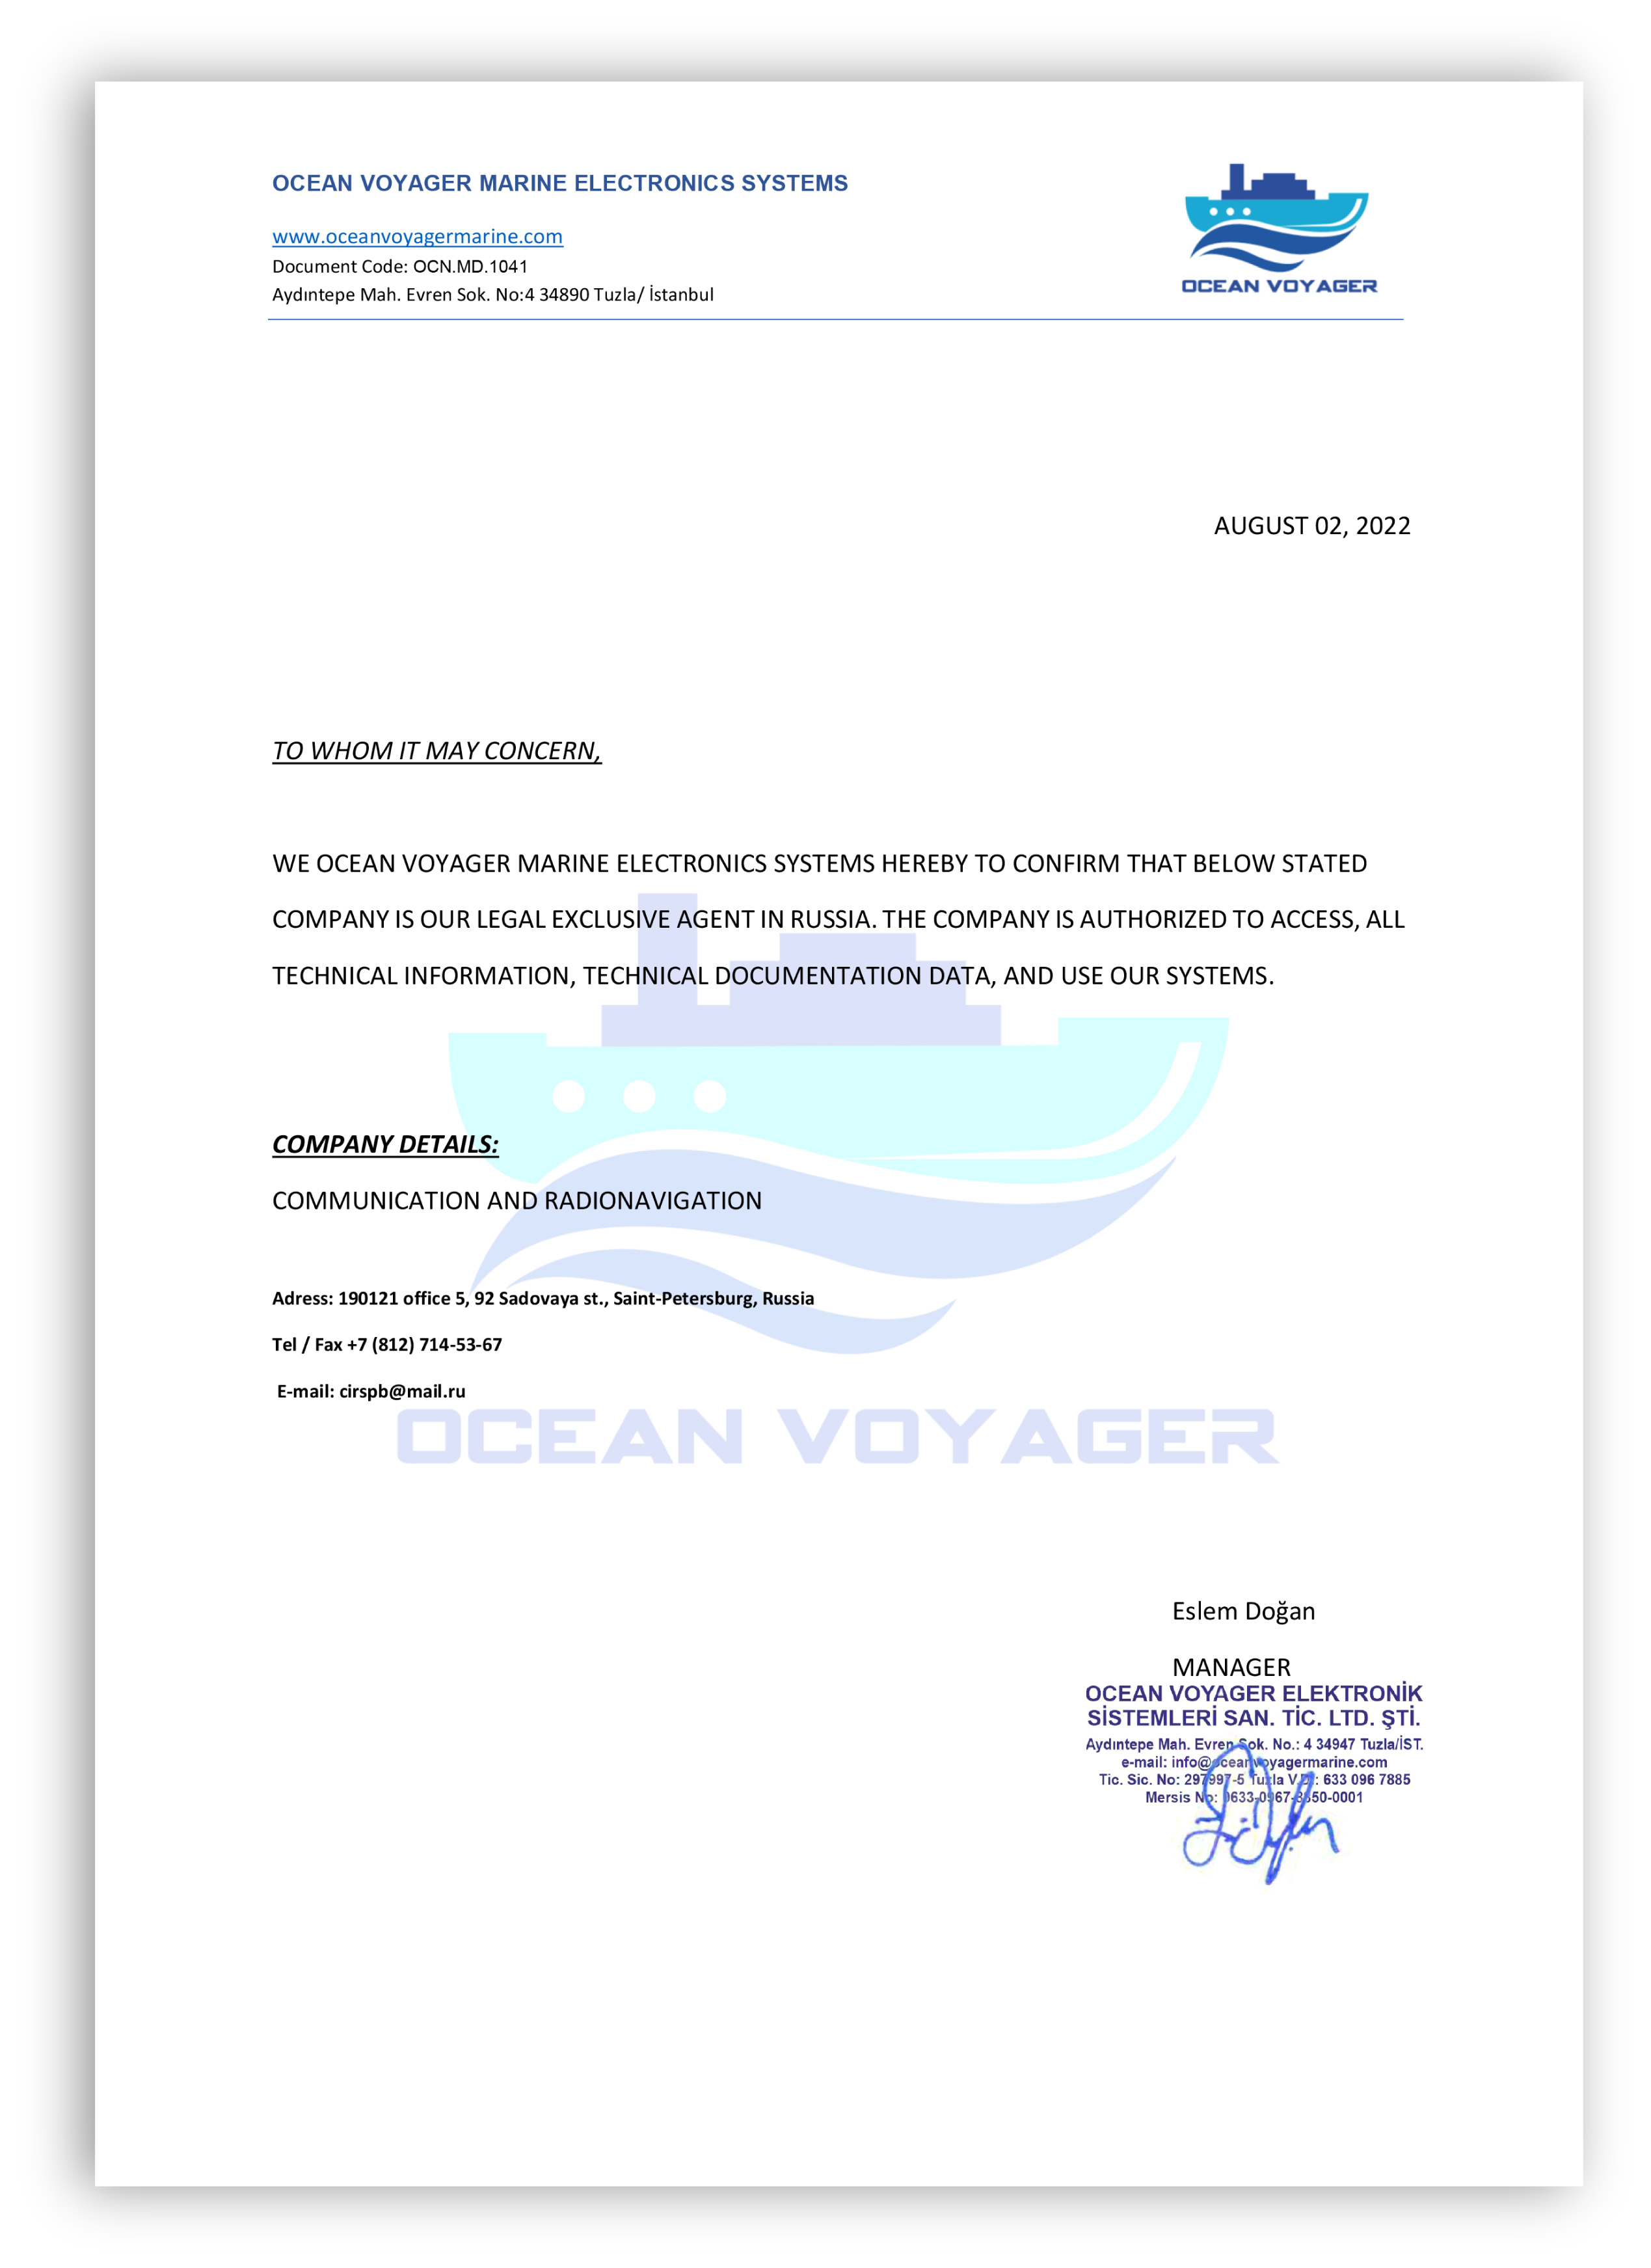 Letter OCEAN VOYAGER MARINE ELECTRONICS SYSTEMS